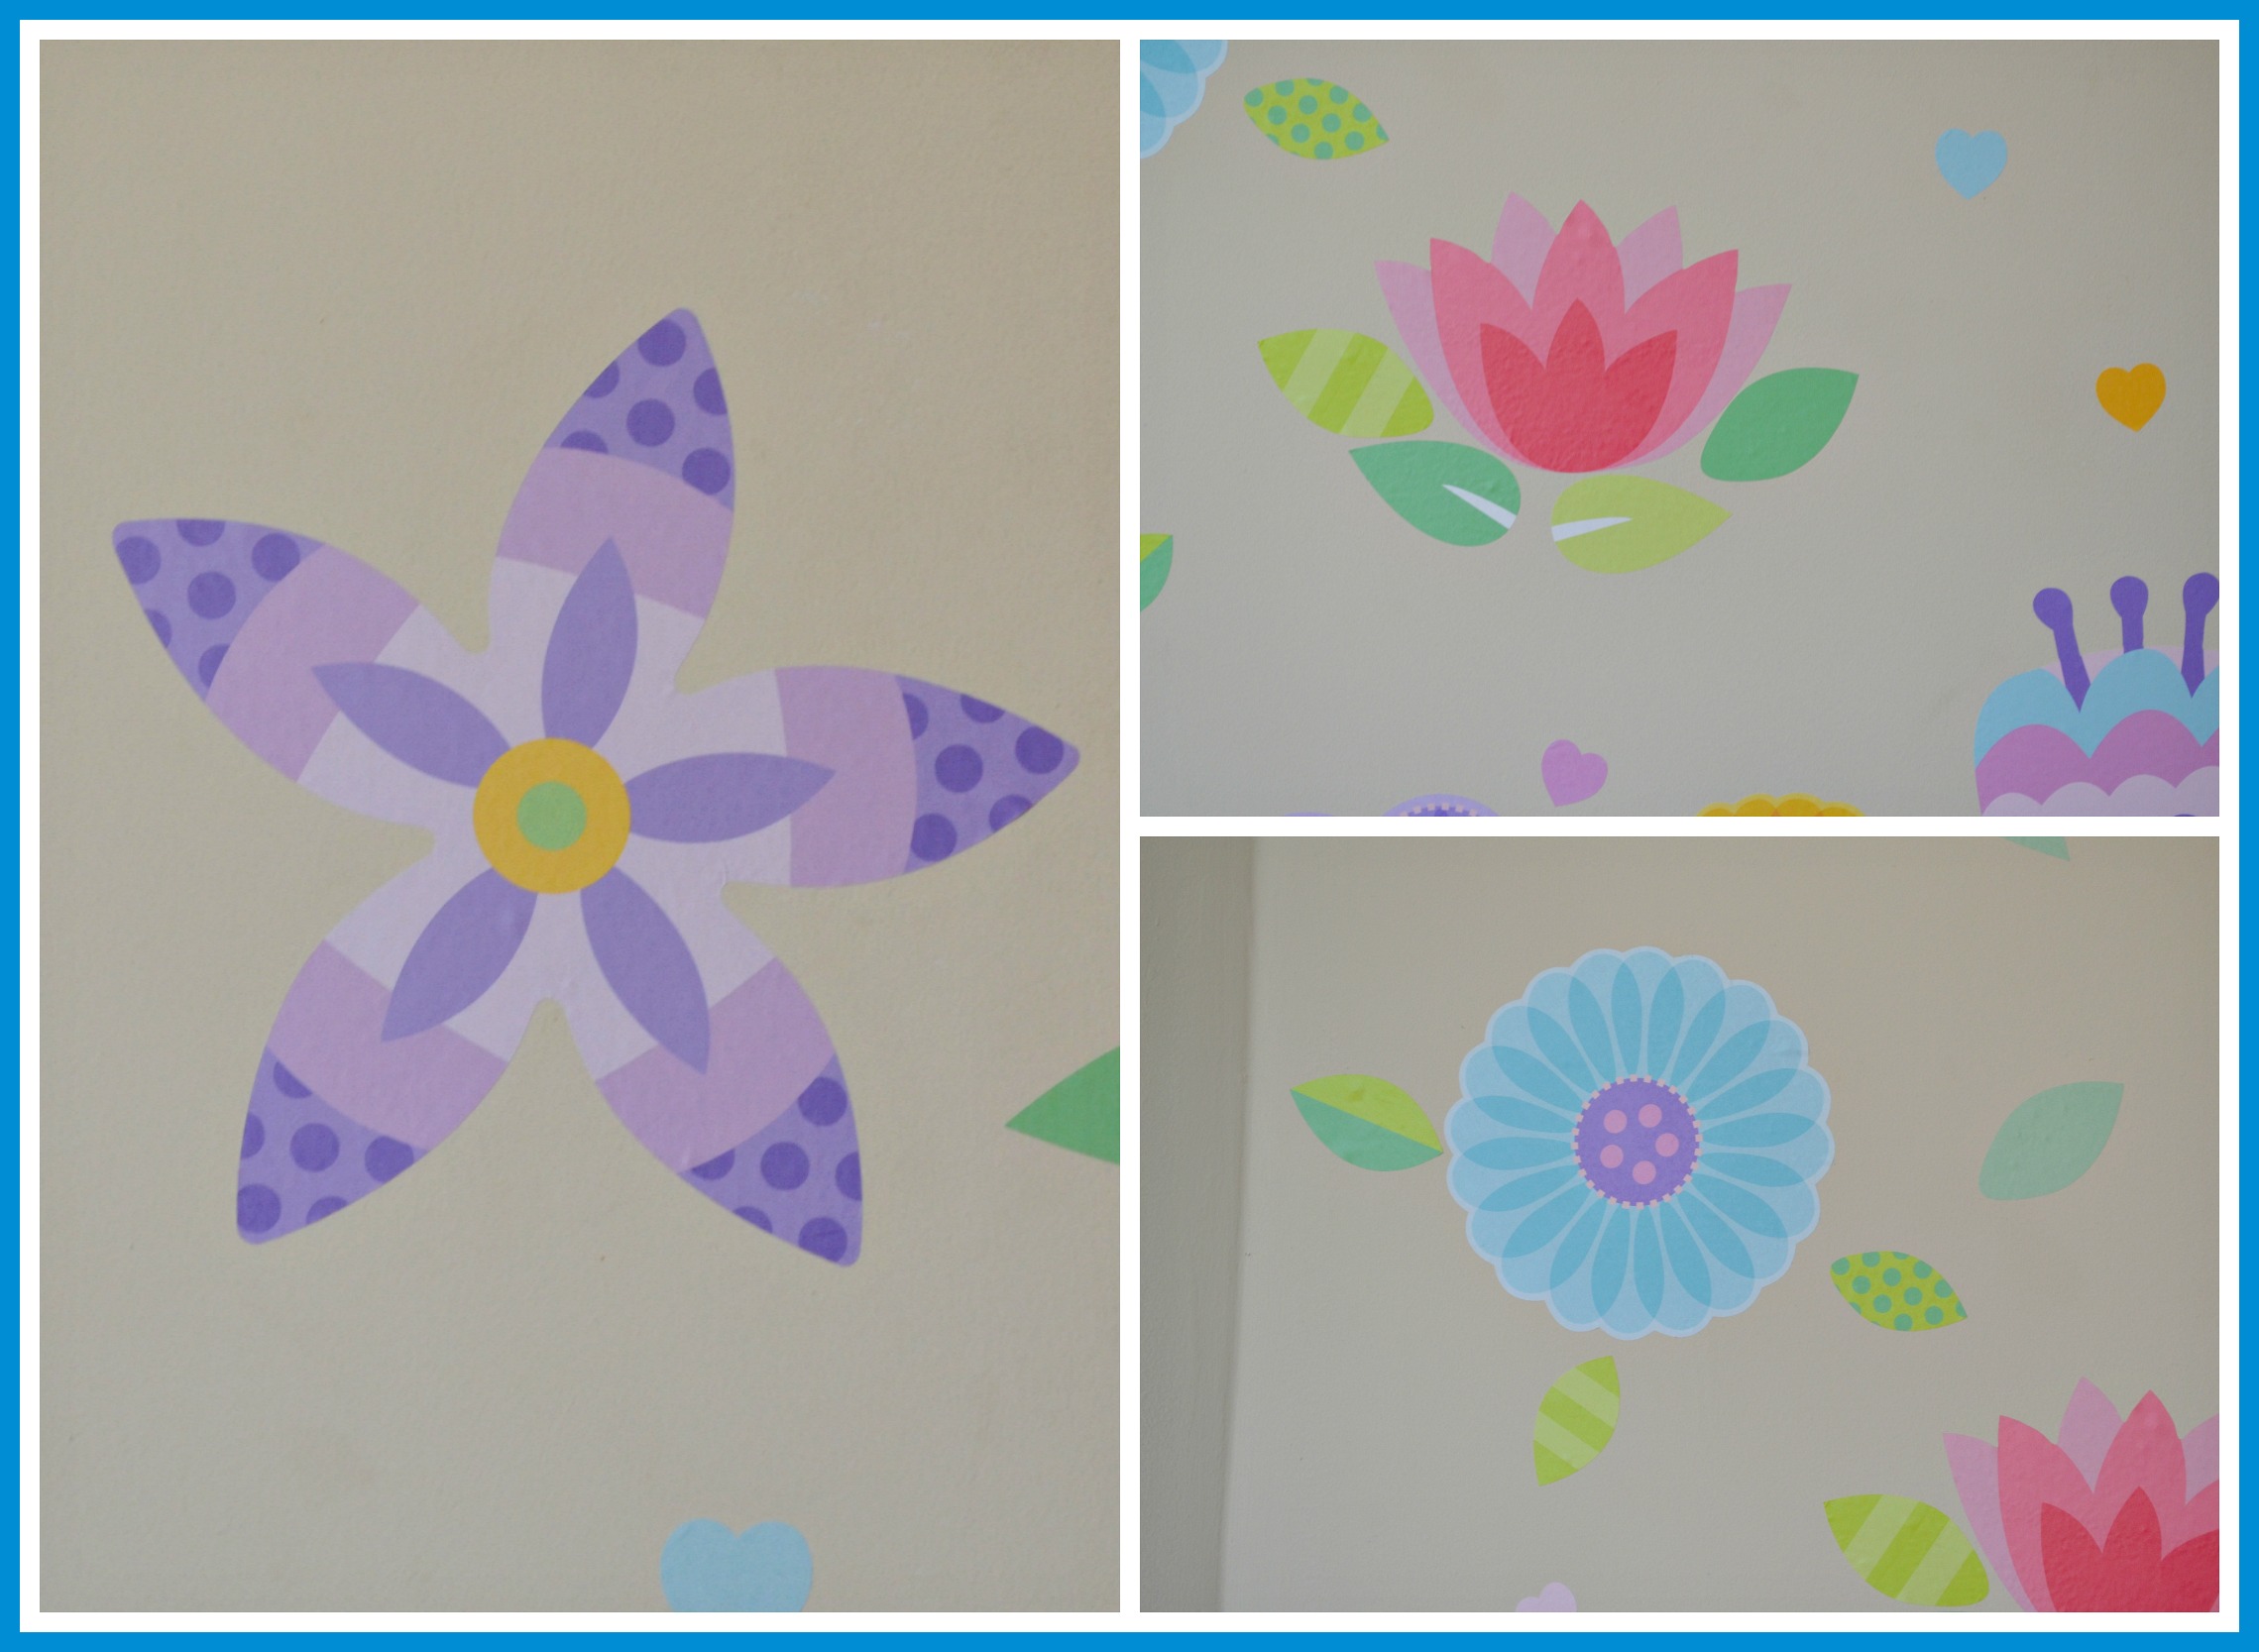 Bright Star Kids Funky Flower Wall Stickers Review